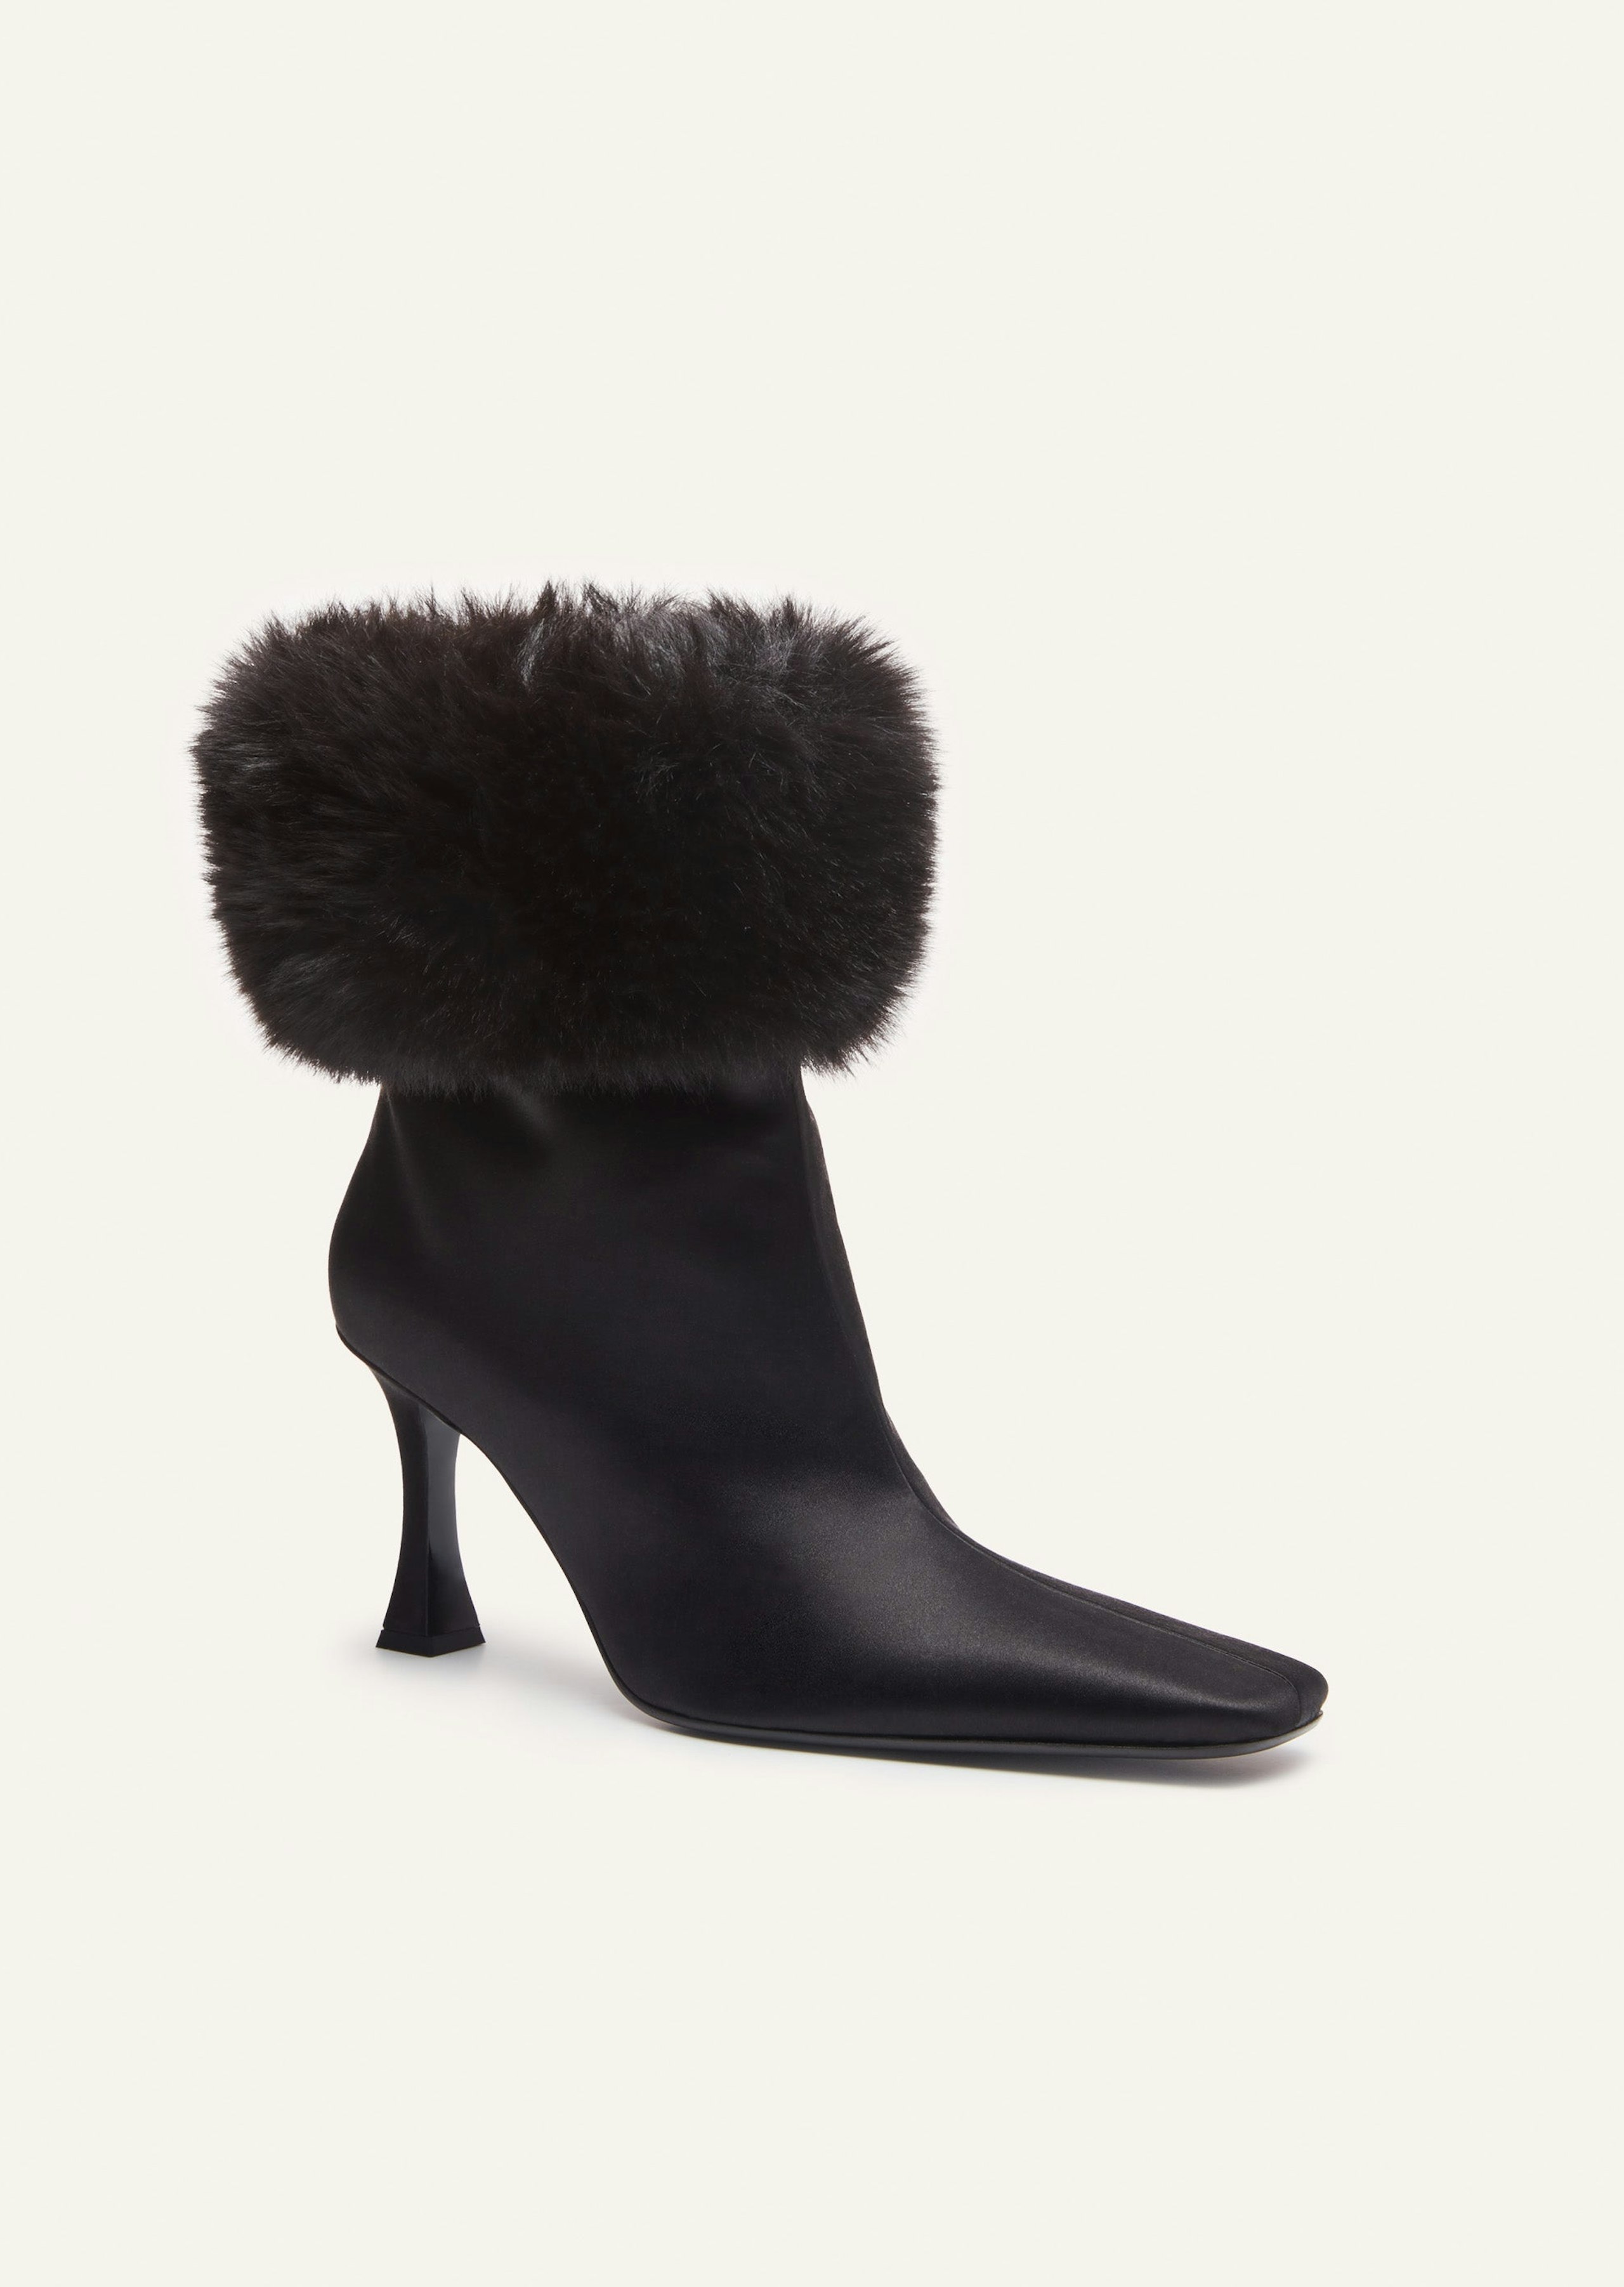 AW23 ANKLE BOOTS SATIN BLACK FAUX FUR